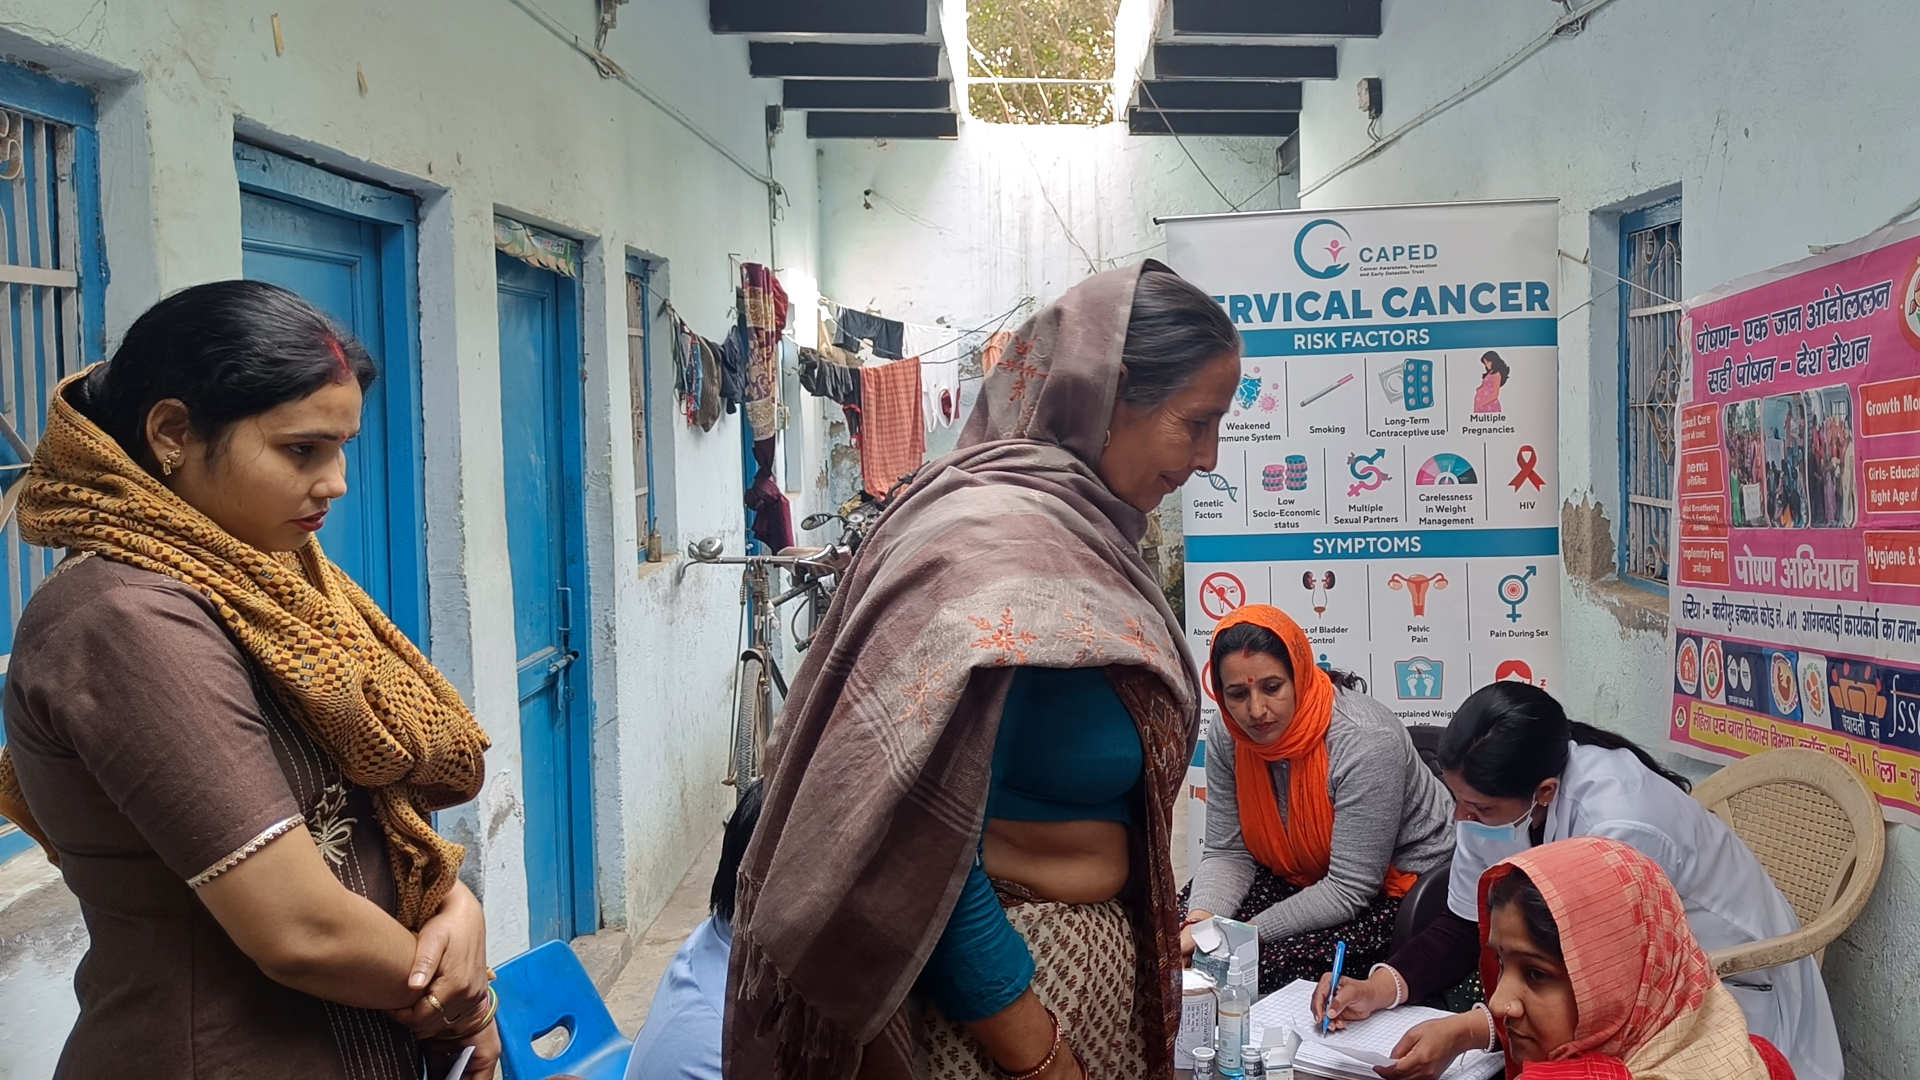 Women wait in line at a cervical cancer screening clinic in Kadipur village, India.